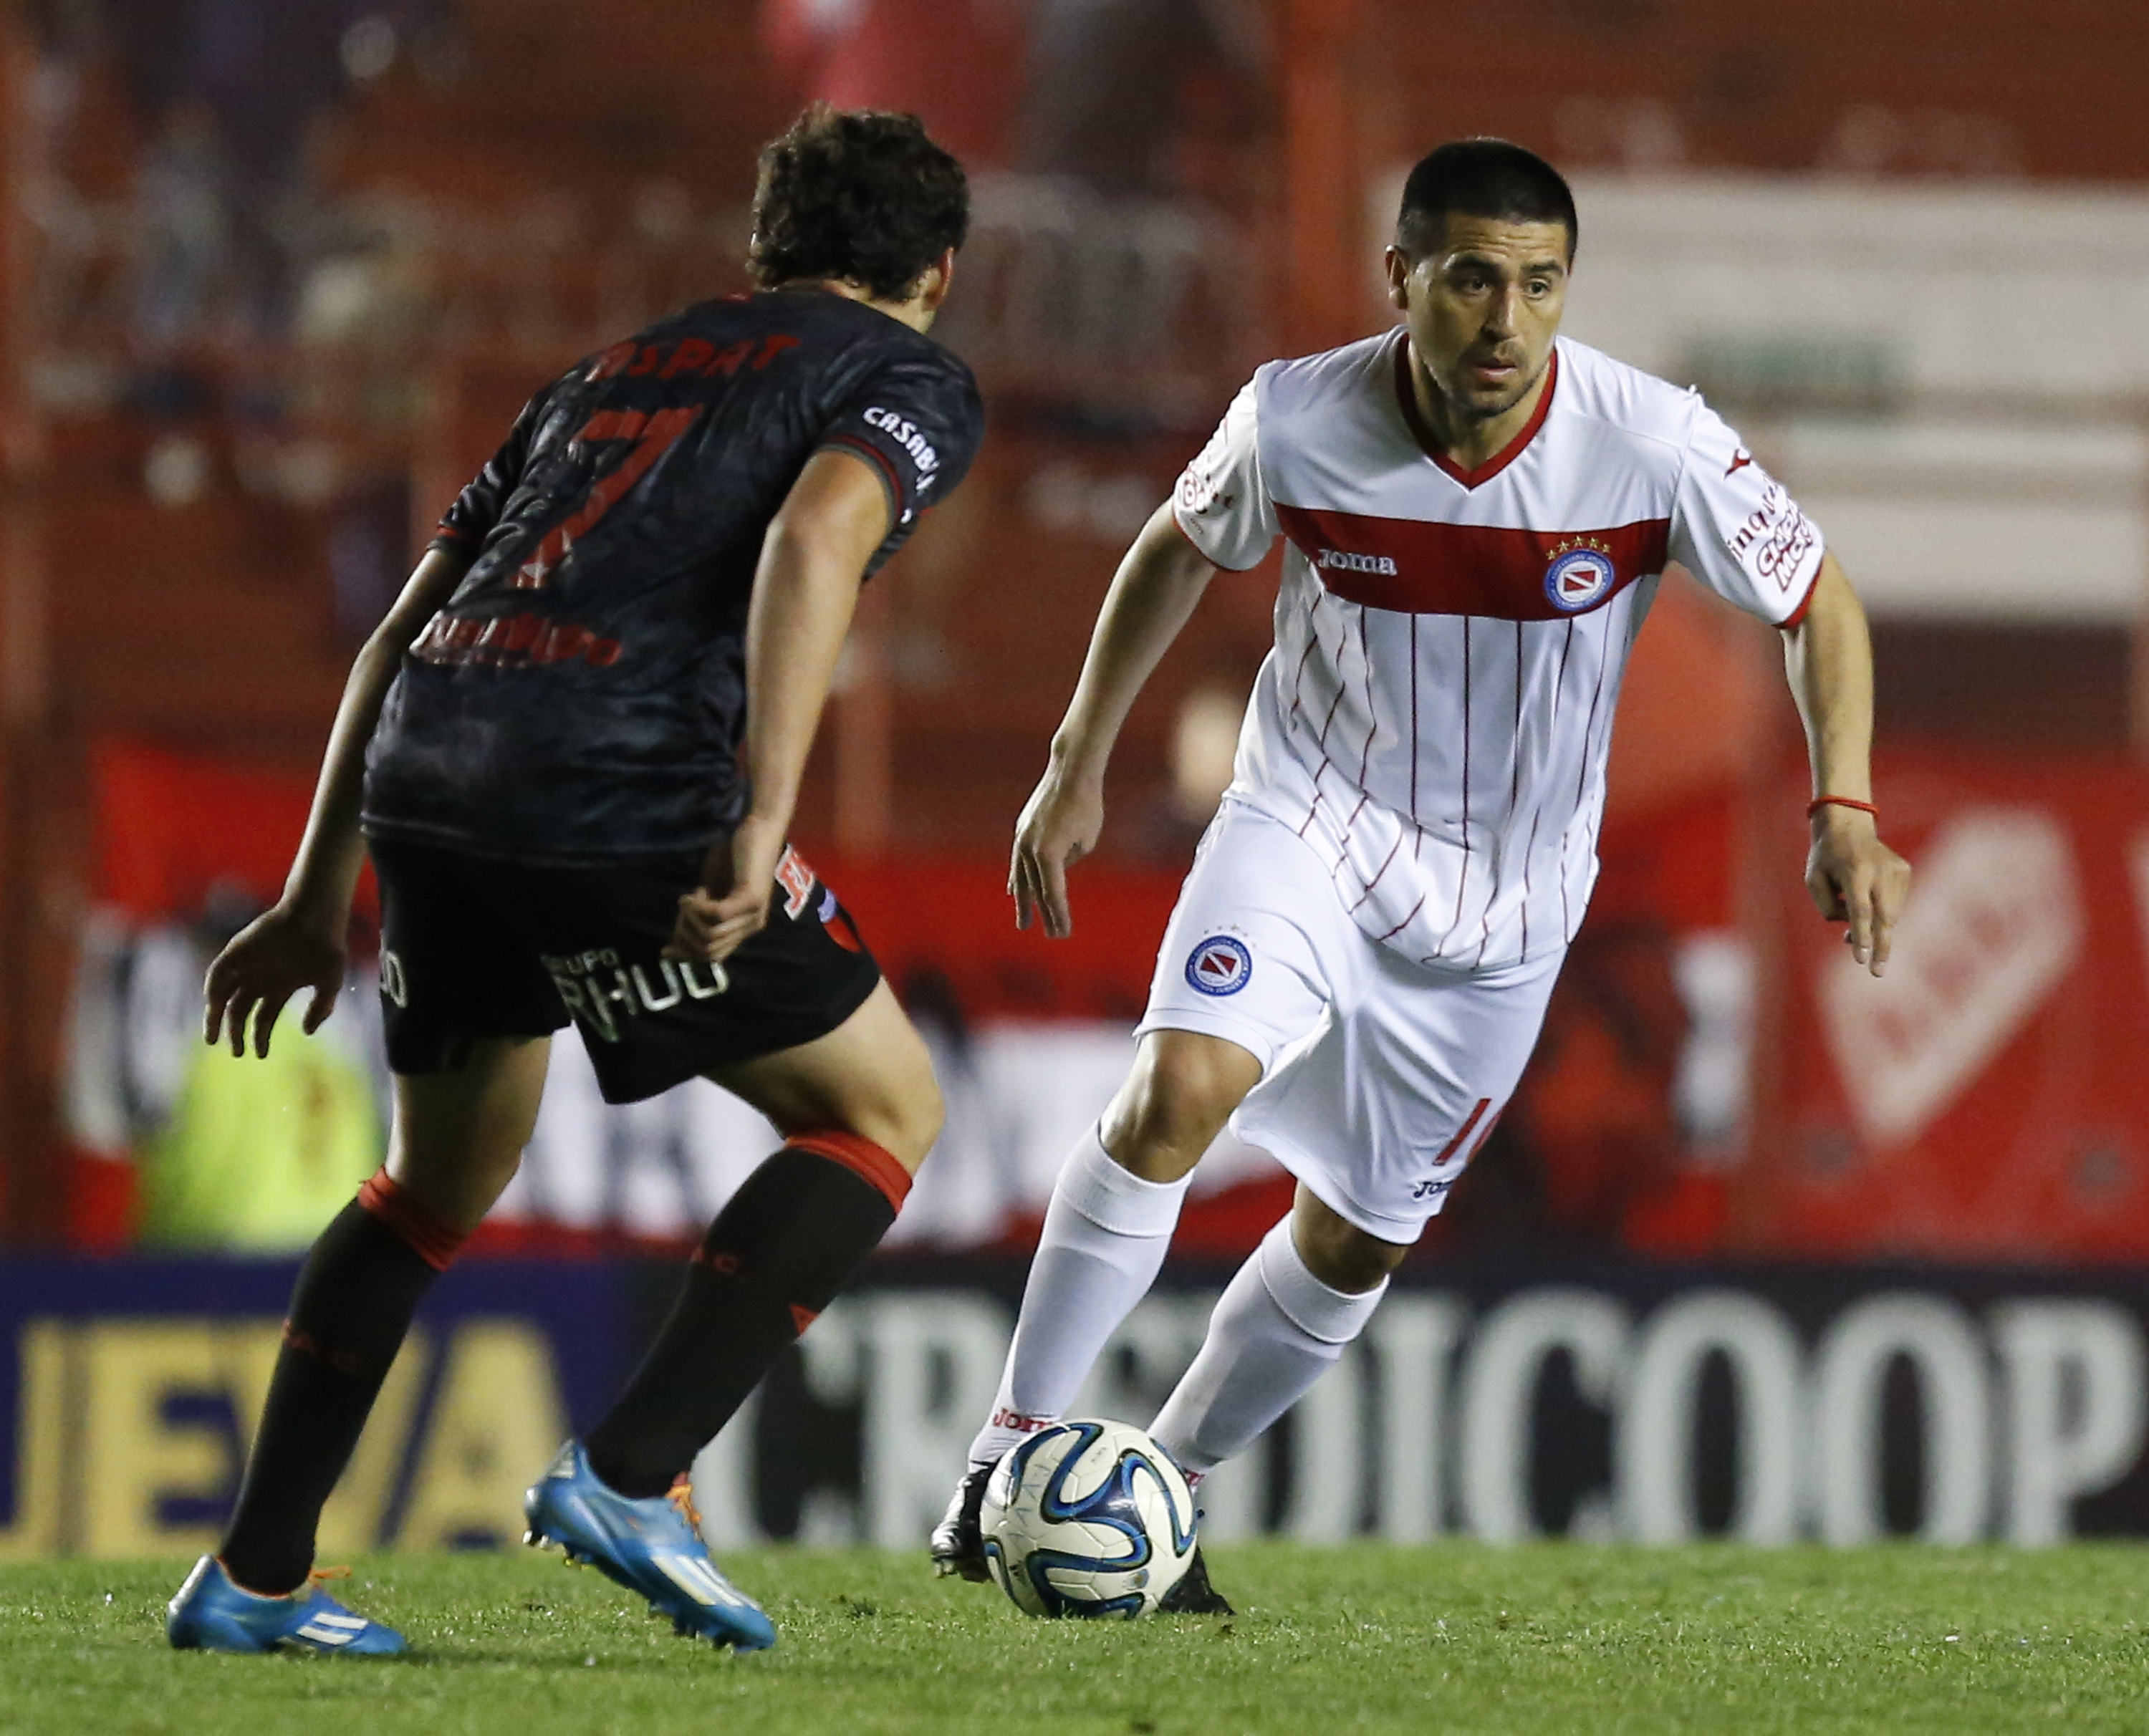 Juan Roman Riquelme in action for Argentinos Juniors at the end of his professional career in September 2014.